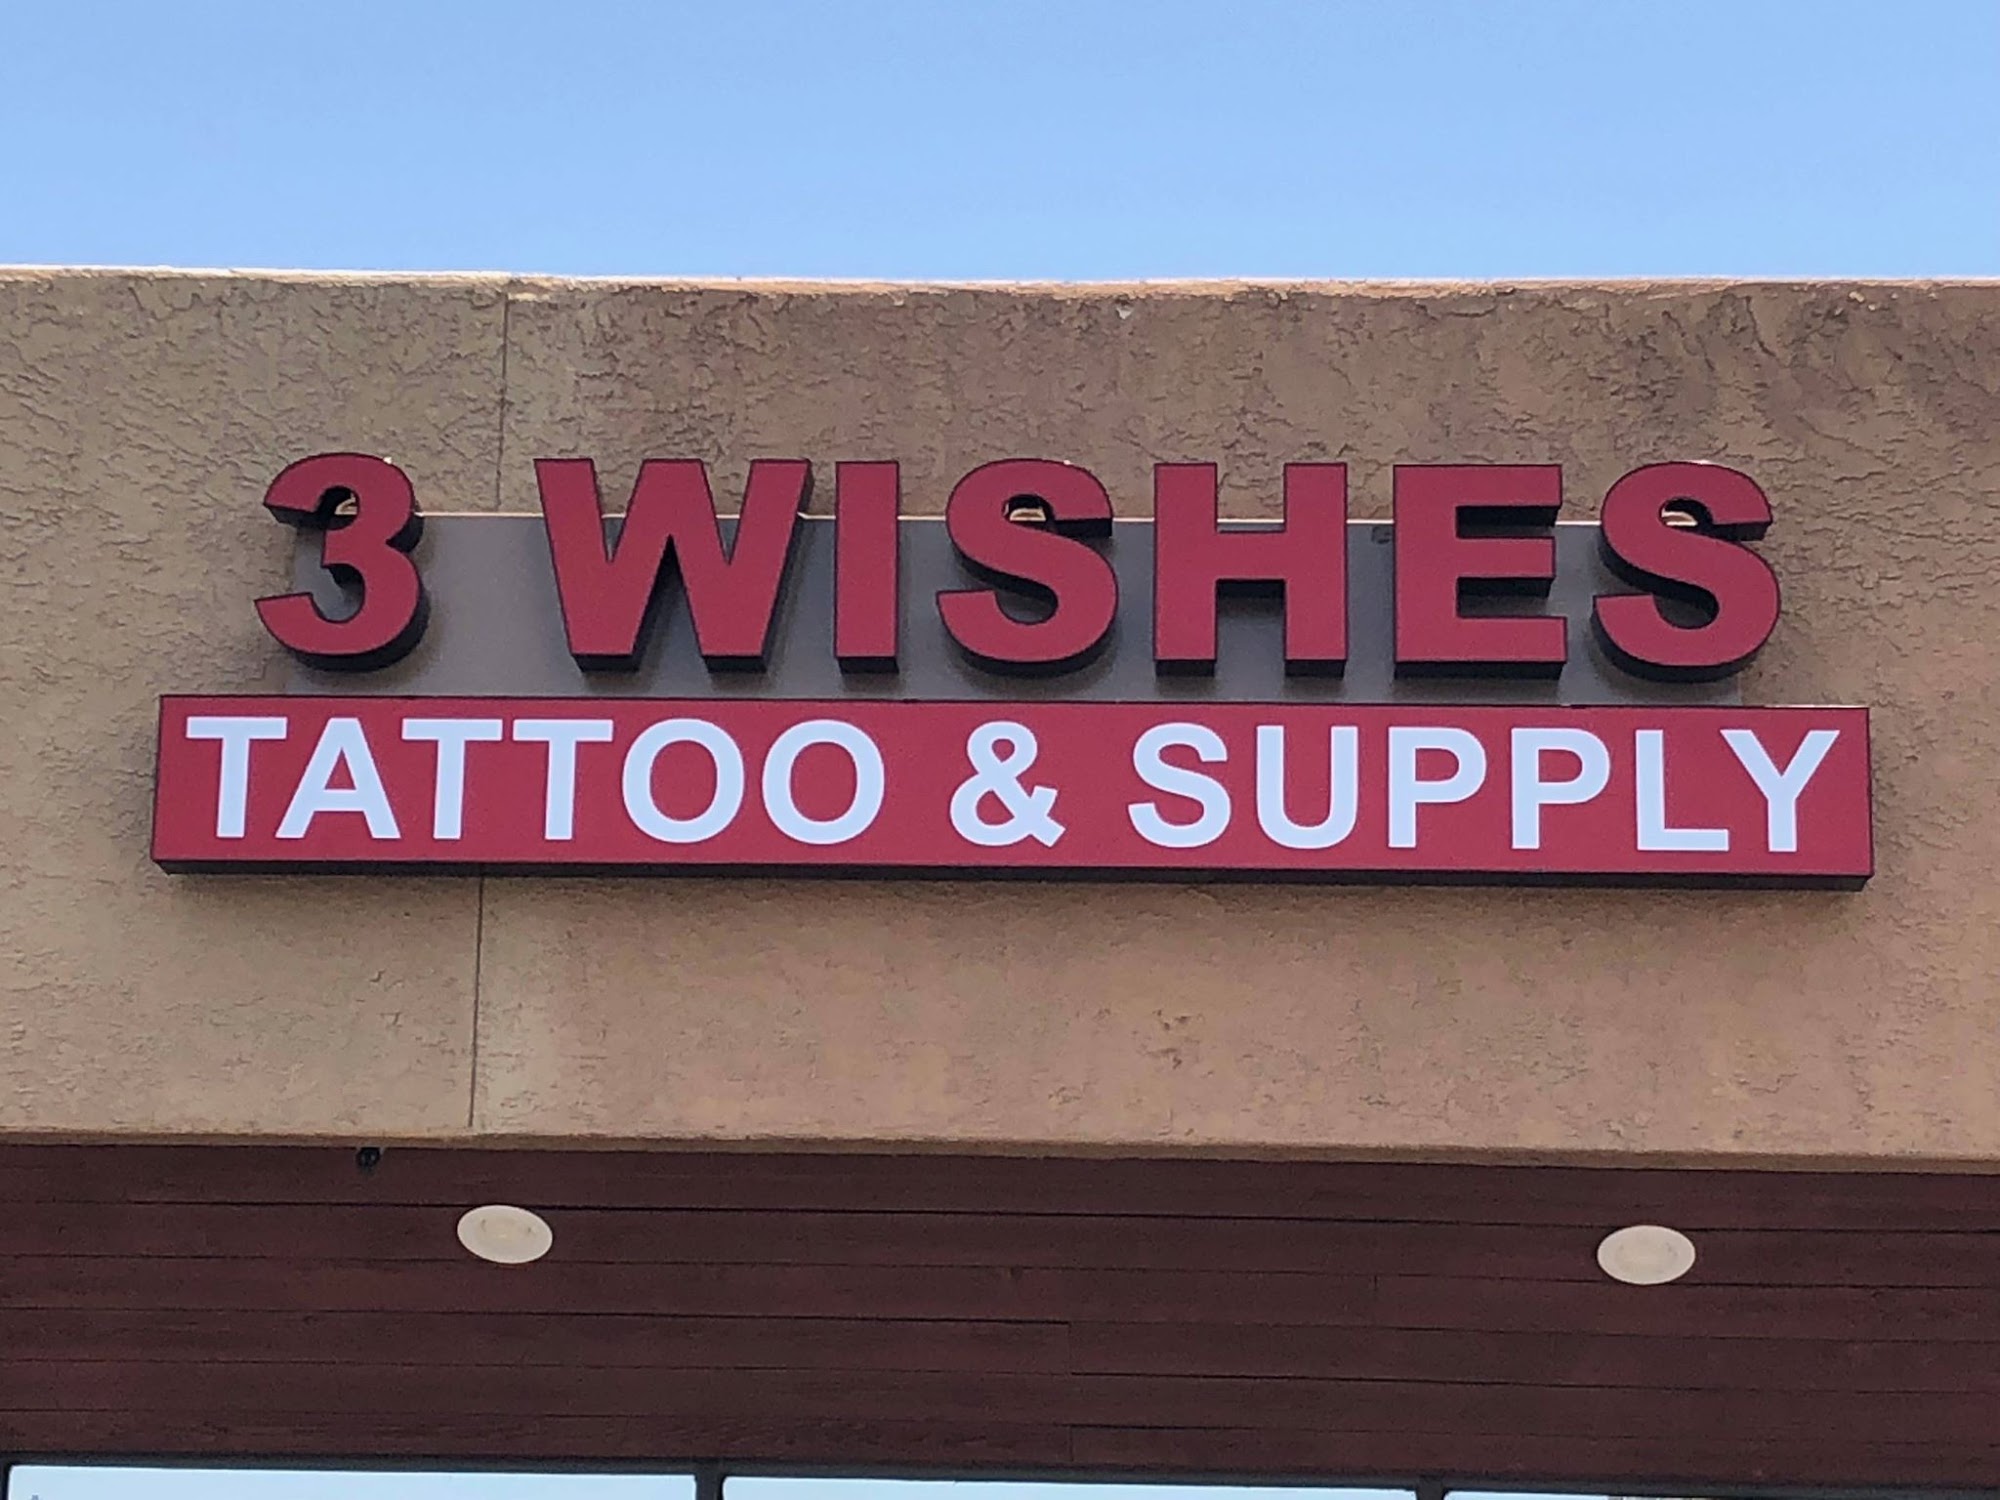 3 Wishes Tattoo and Supply Company